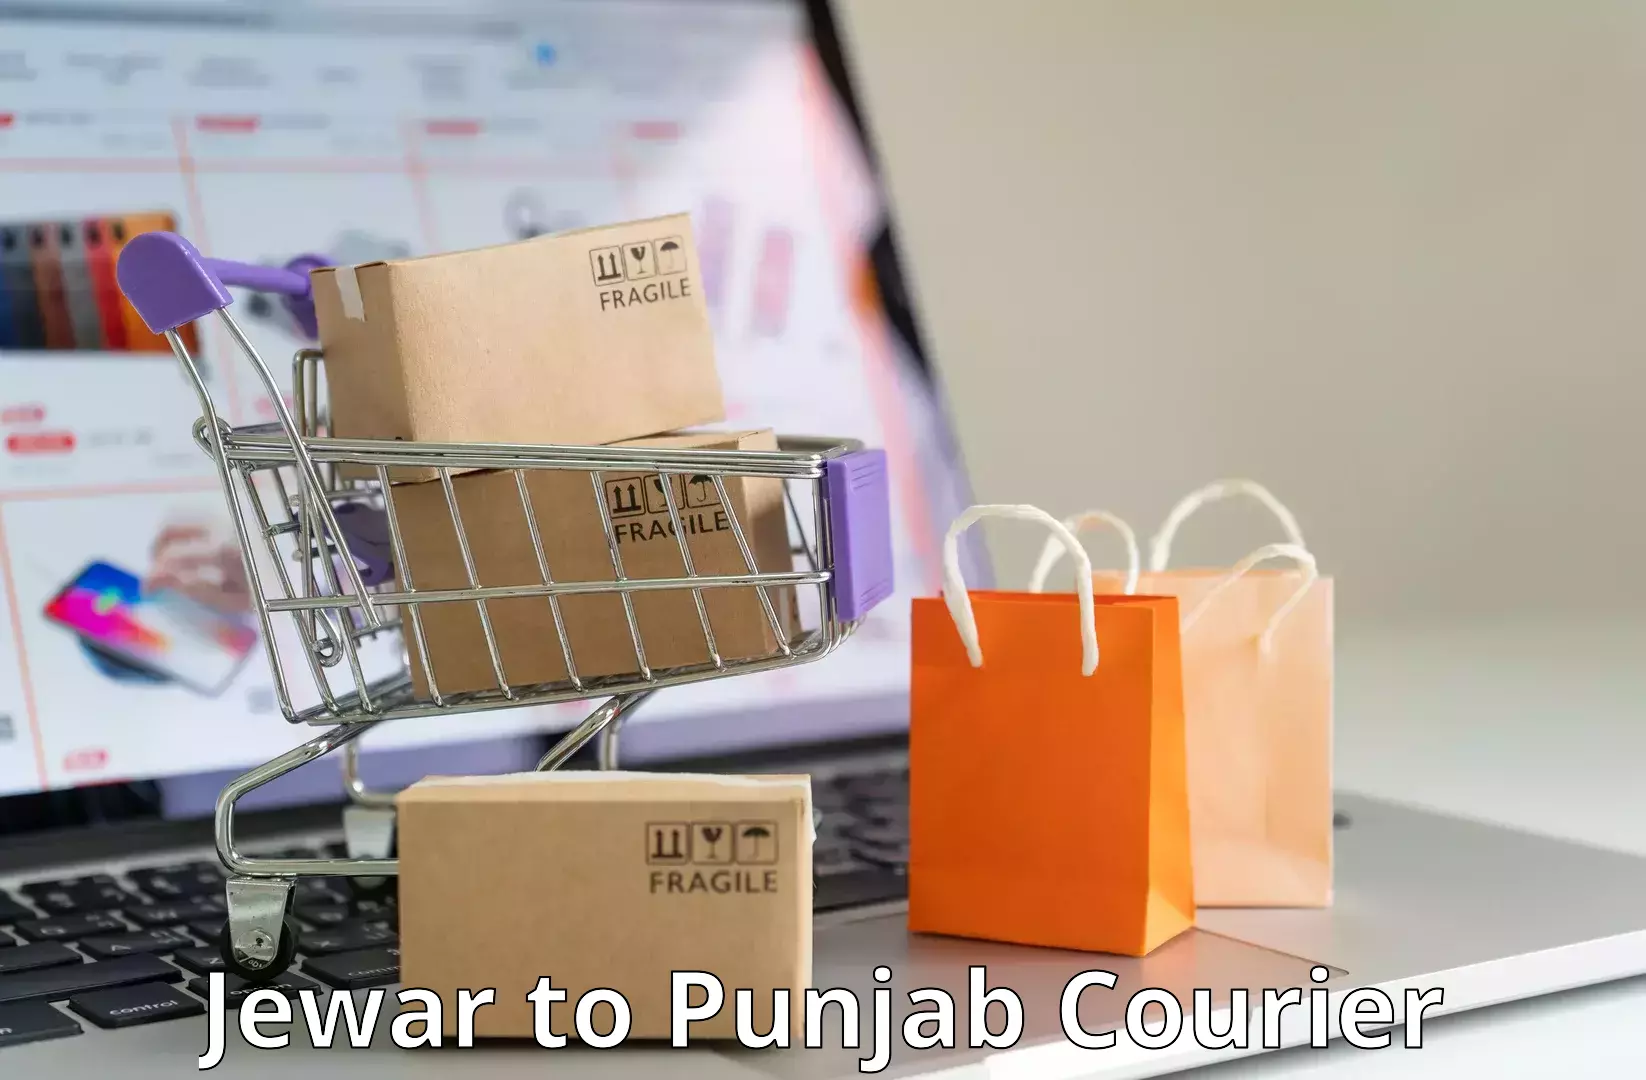 High-priority parcel service Jewar to Sultanpur Lodhi